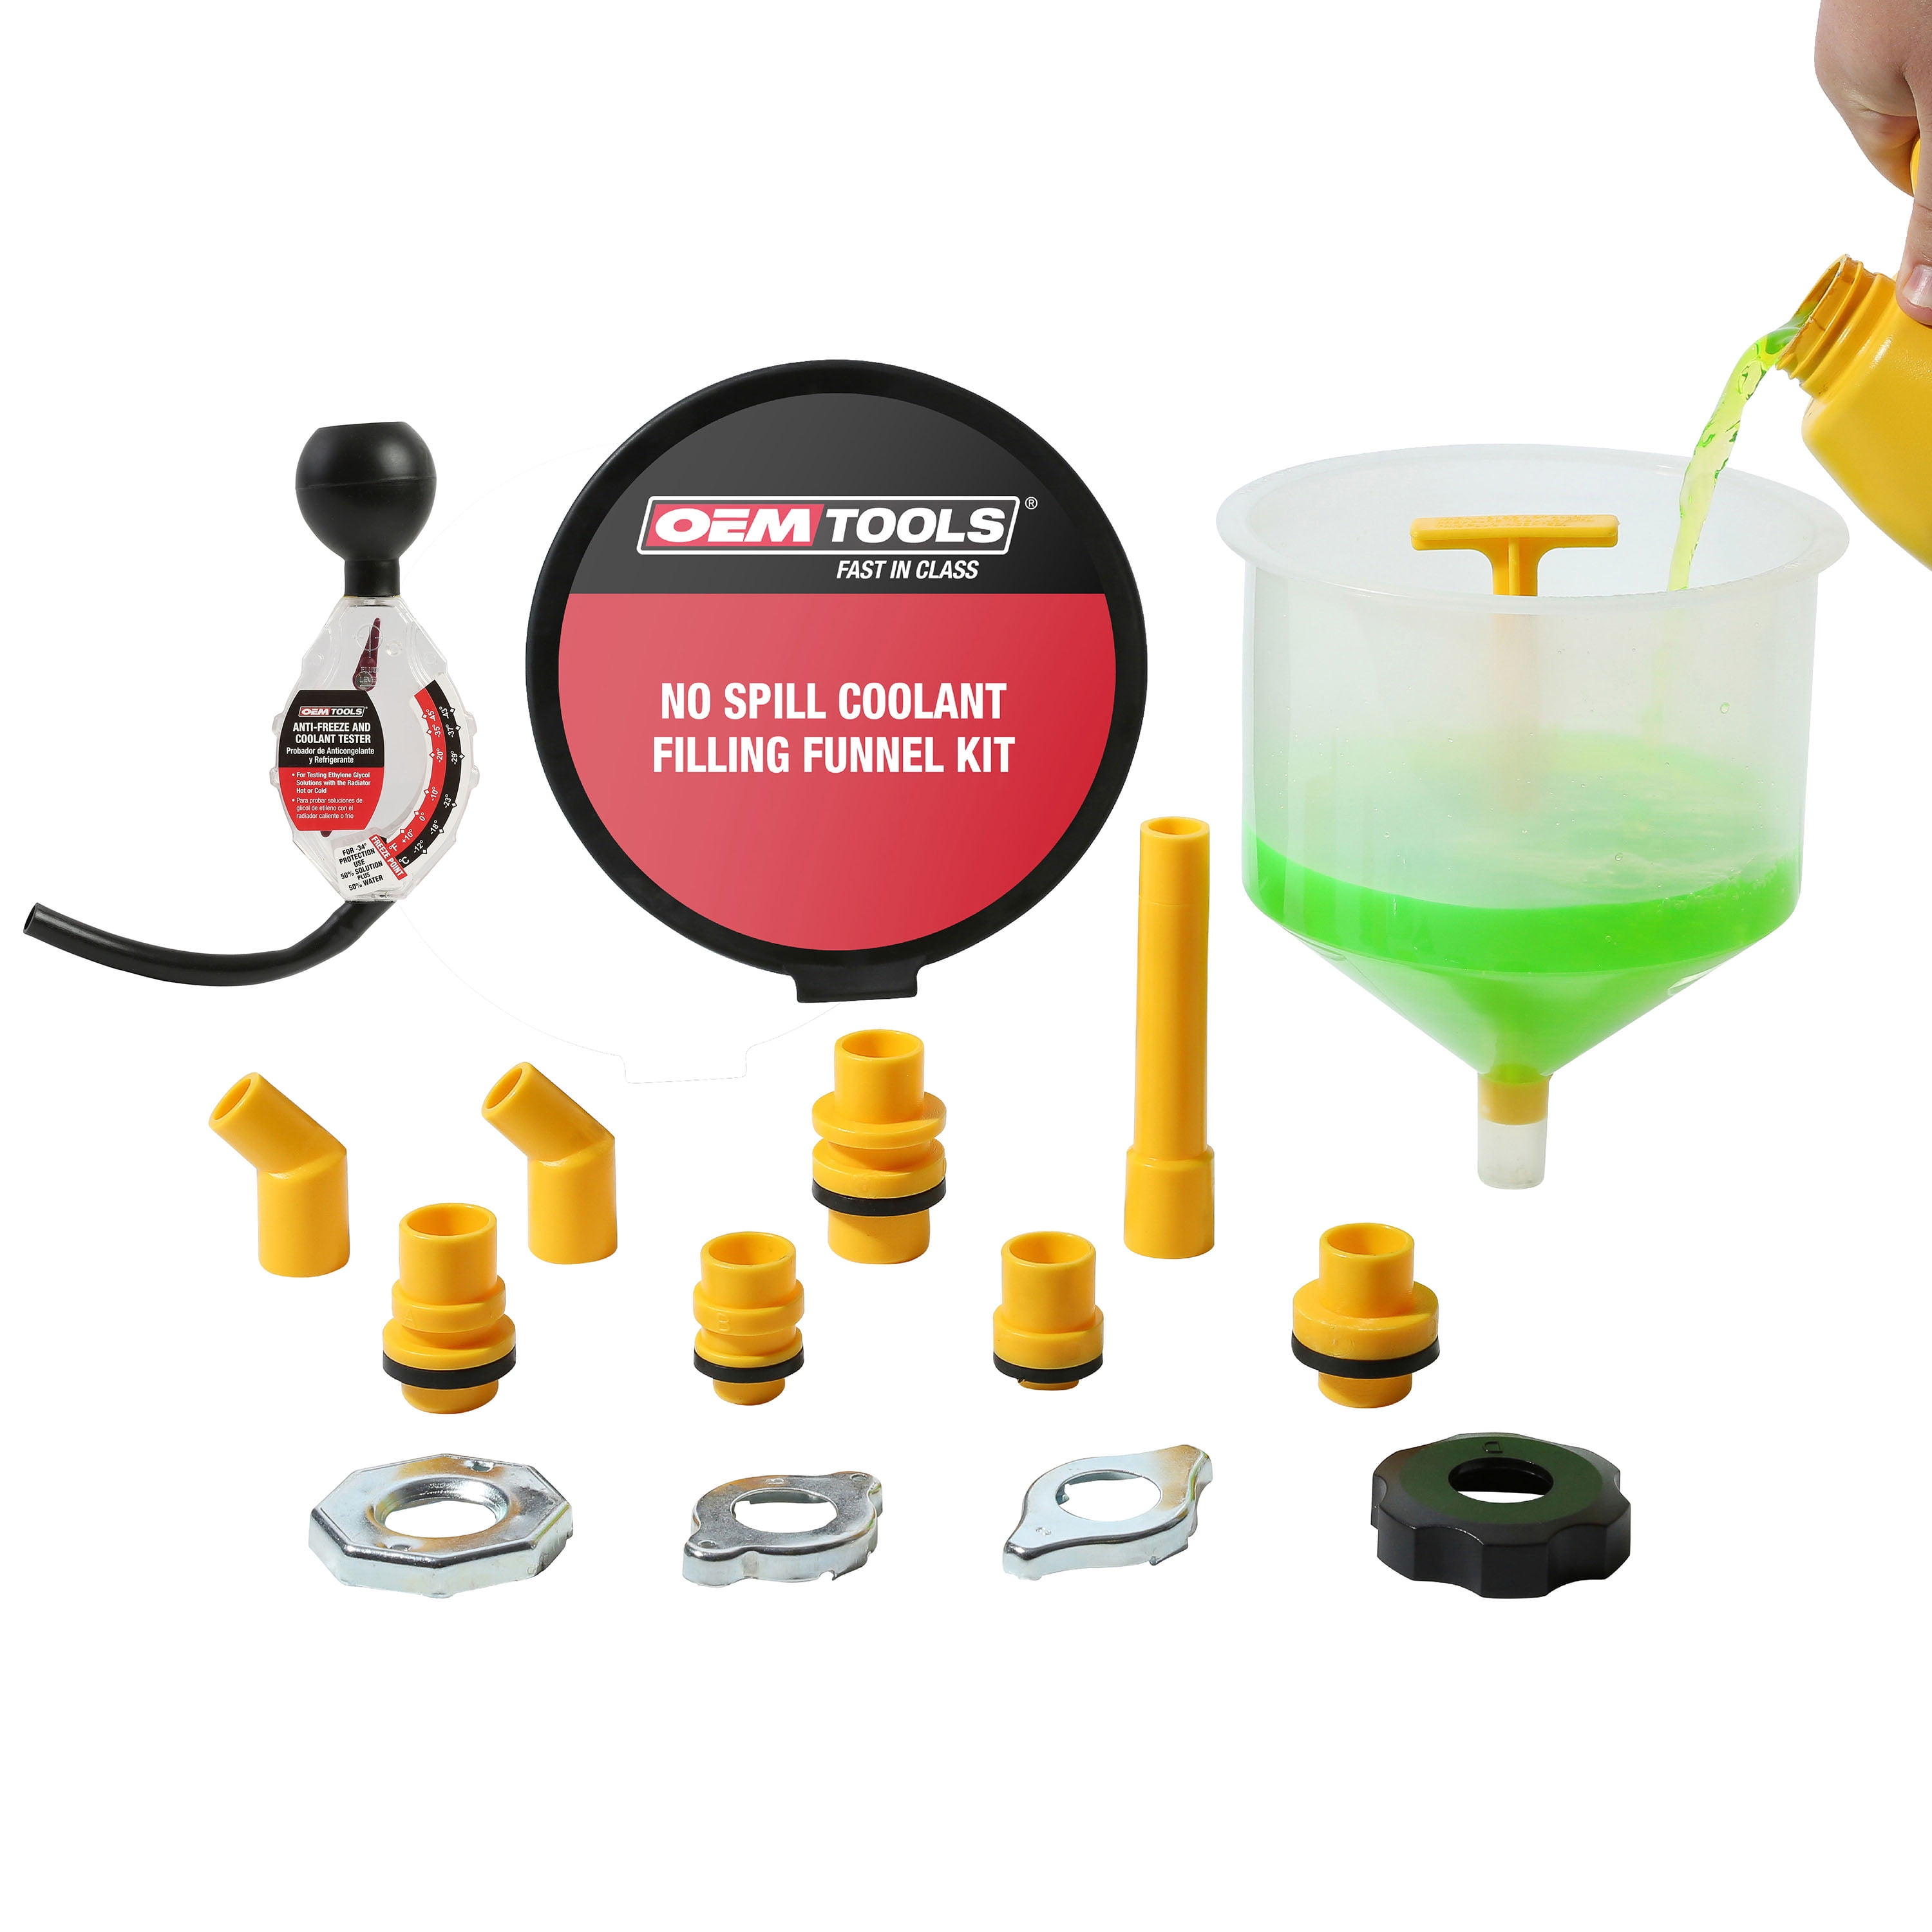 OEMTOOLS 87045 No Spill Coolant Filling Funnel Kit with Coolant